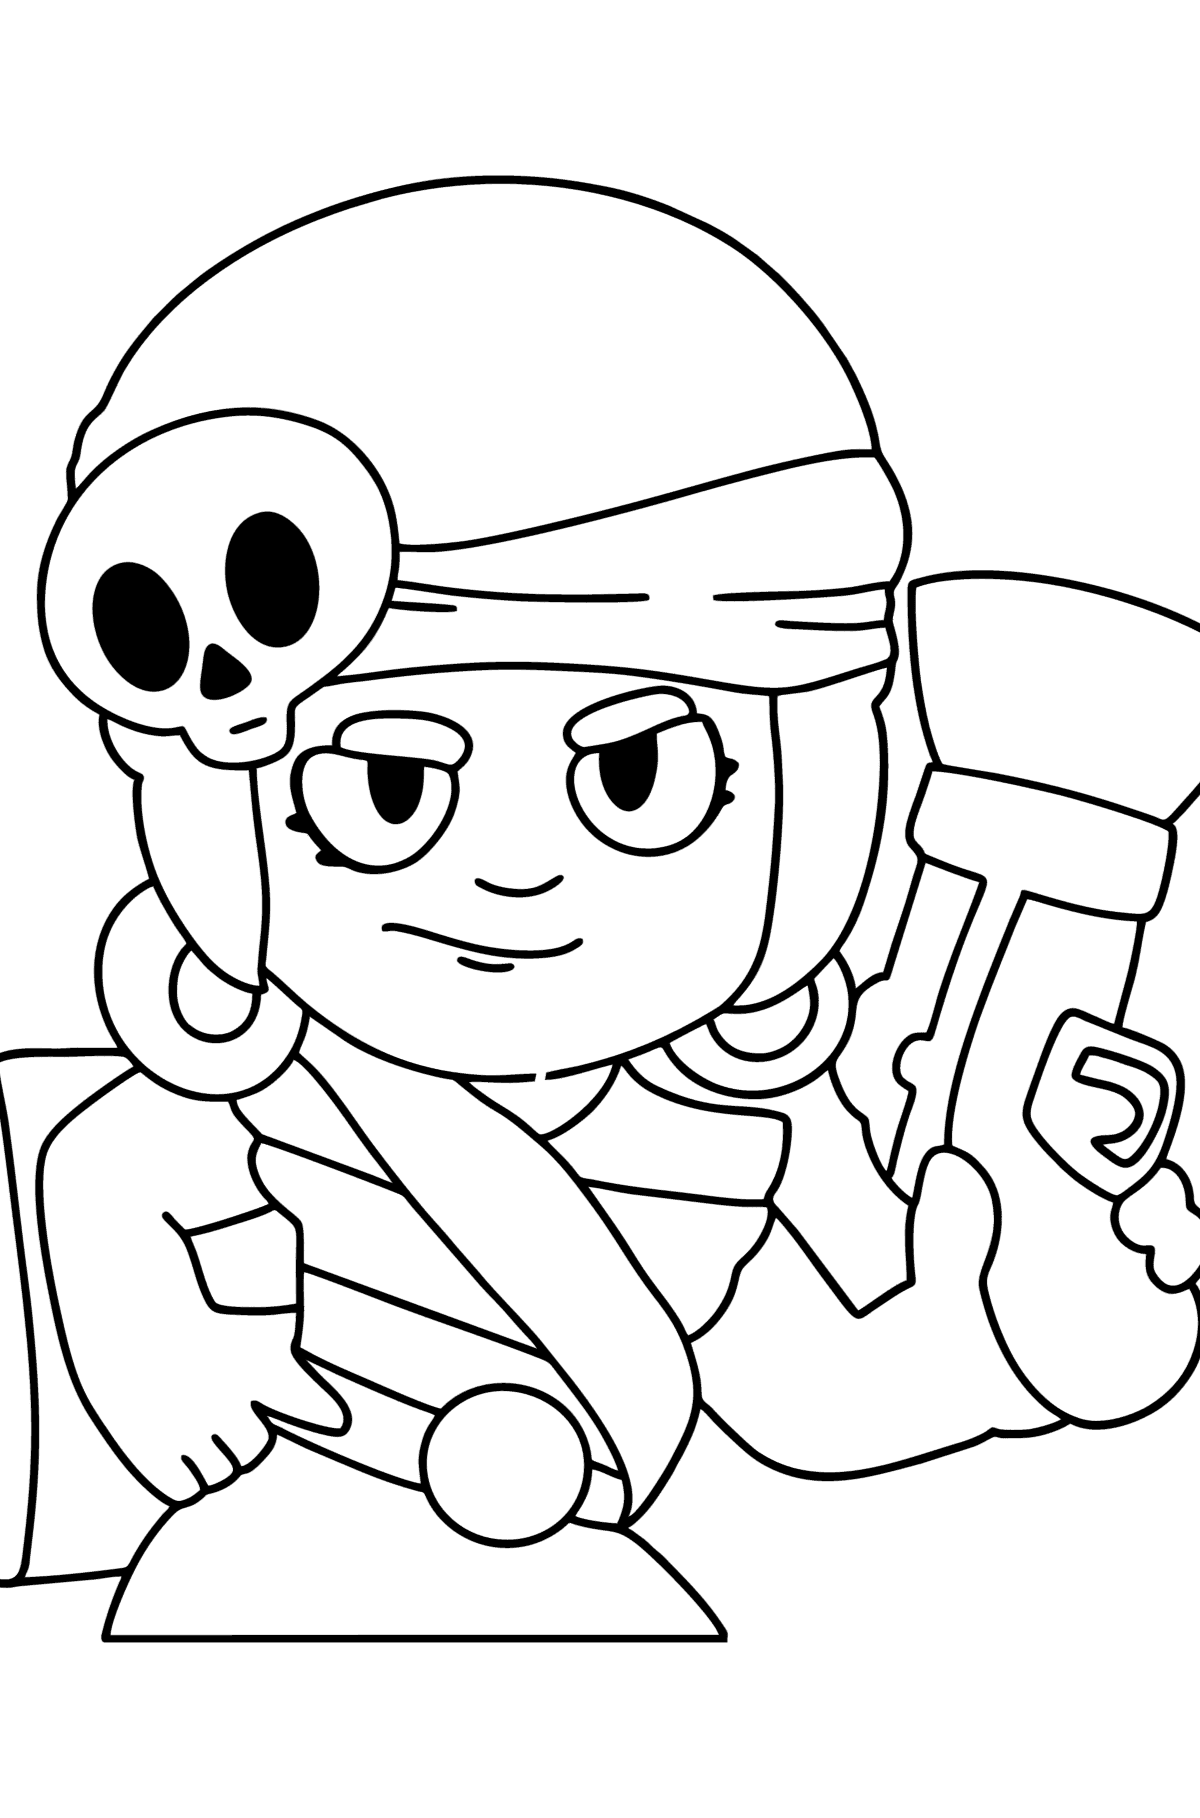 Brawl Stars Penny coloring page - Coloring Pages for Kids